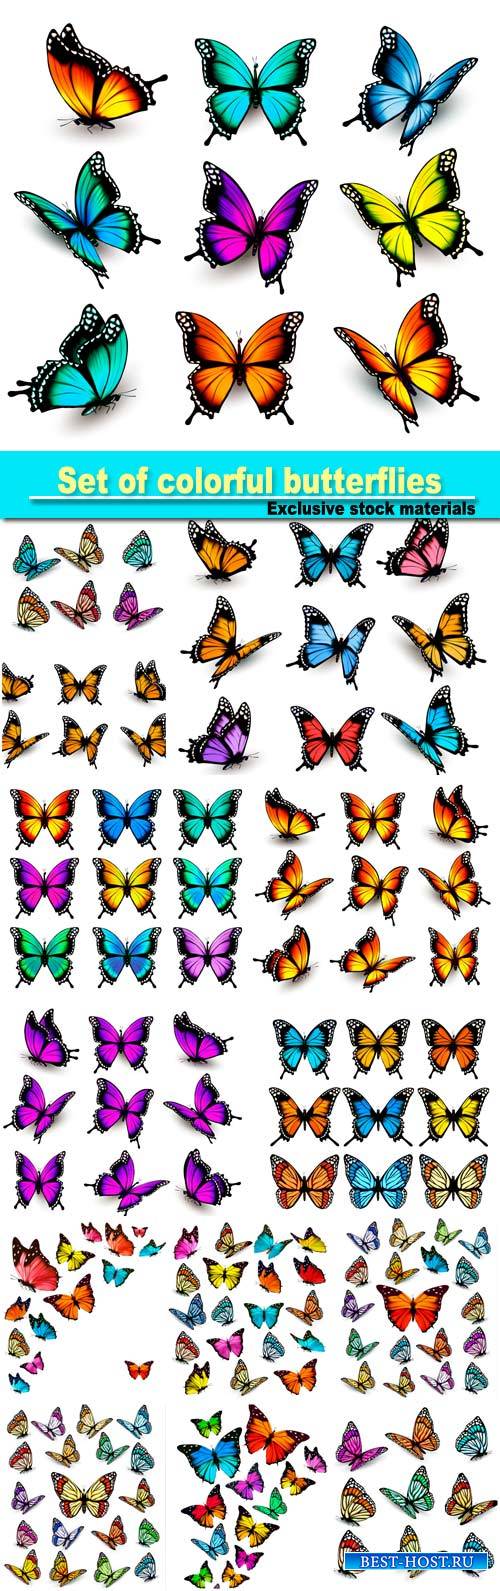 Set of colorful butterflies vector #7